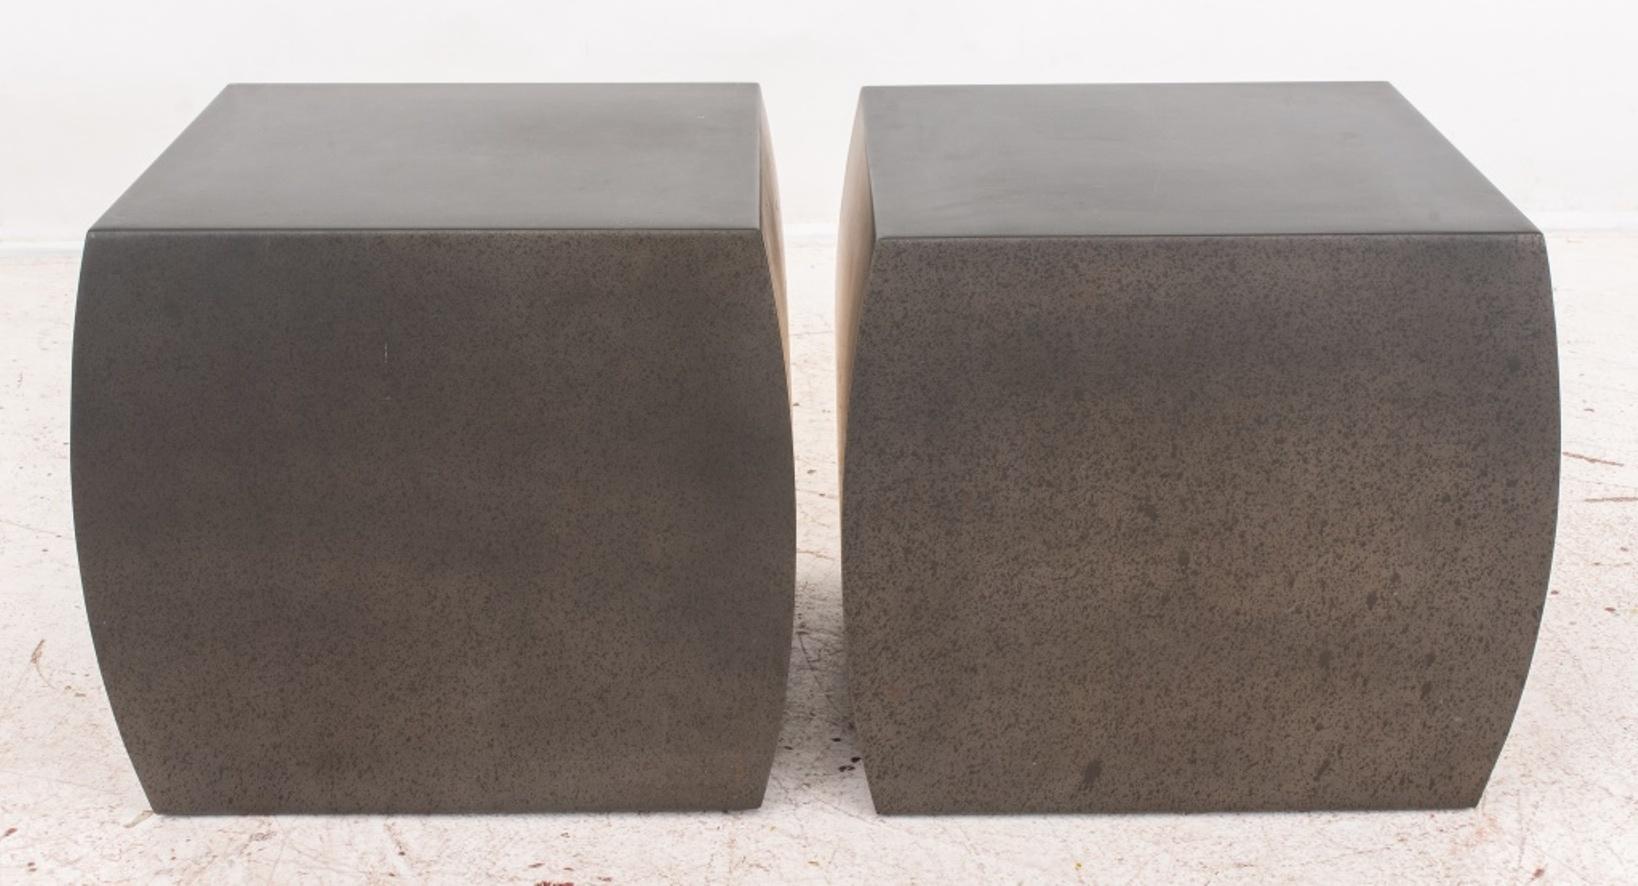 Pair of Robert Kuo (Chinese-American, born 1946) manner metal square end tables, apparently unsigned.

Dimensions: Each: 18.5